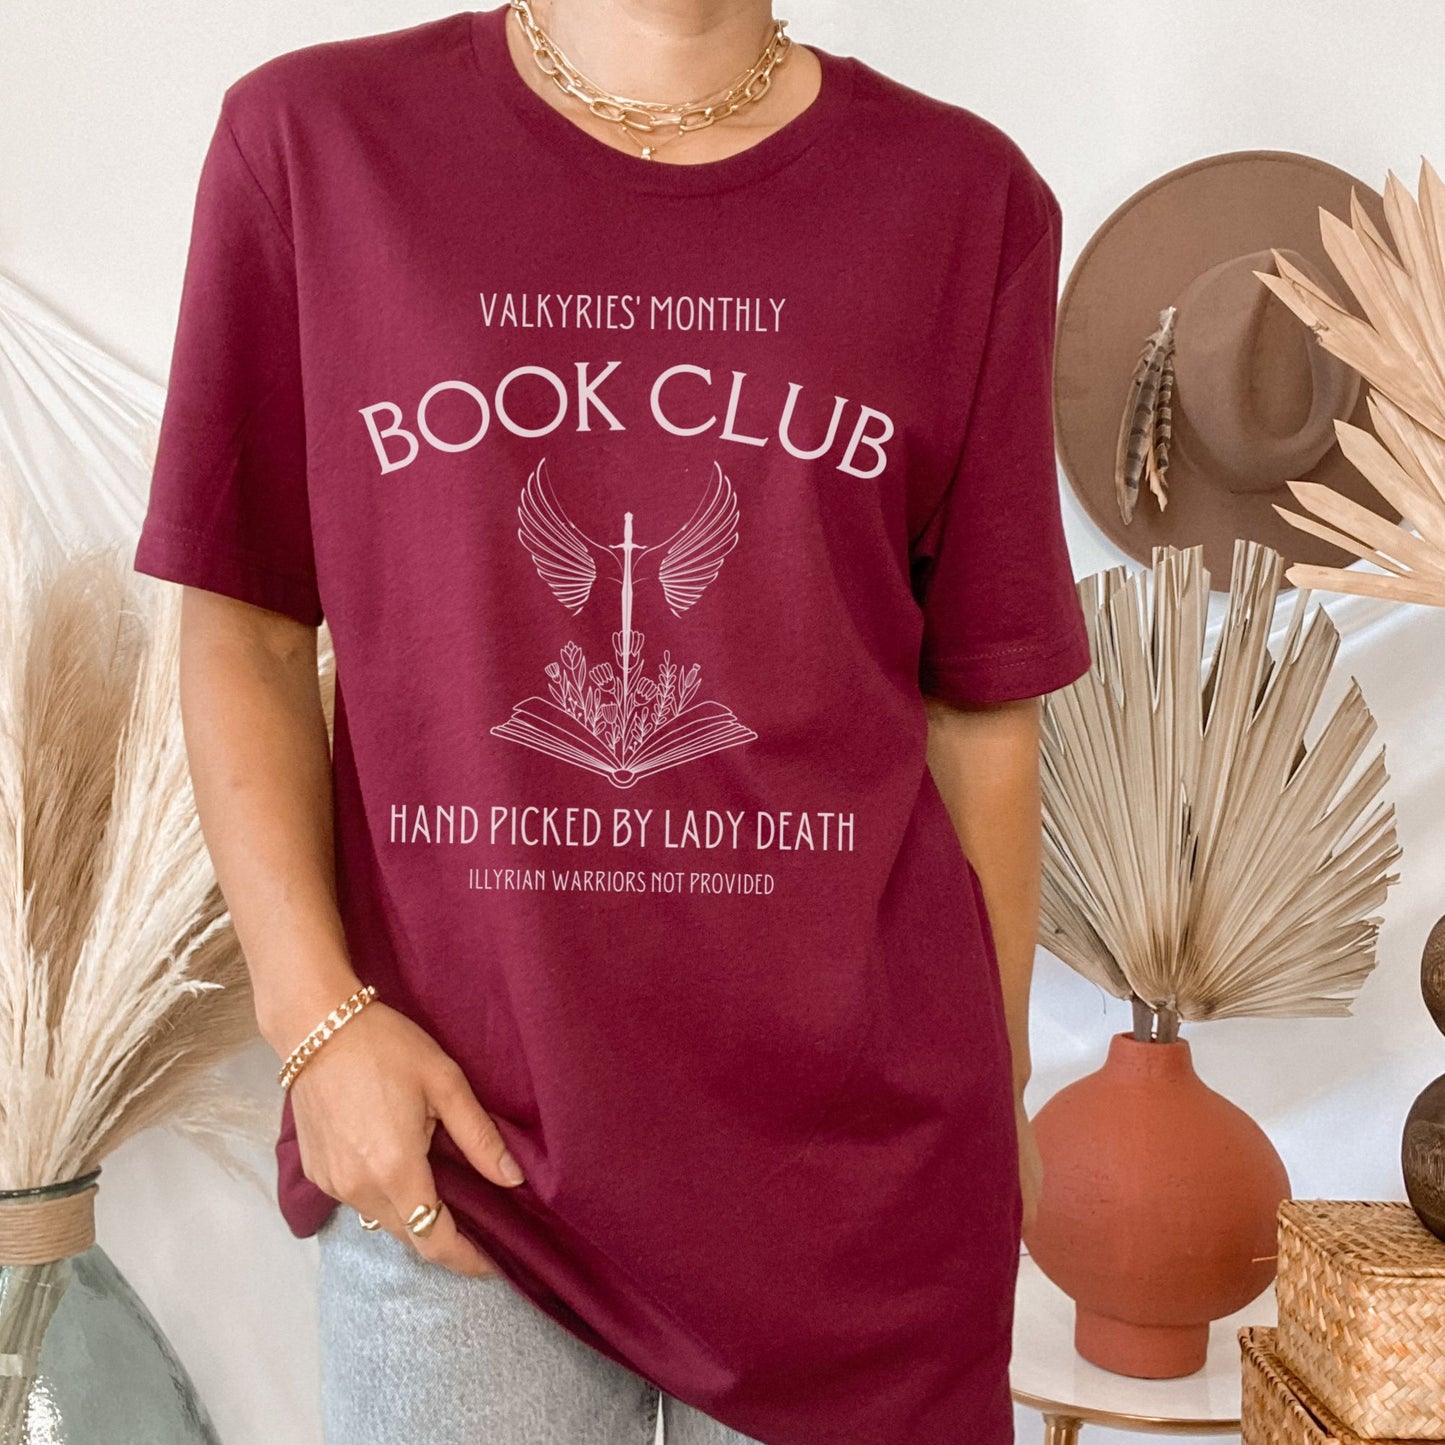 Valkyries' Monthly Book Club Shirt